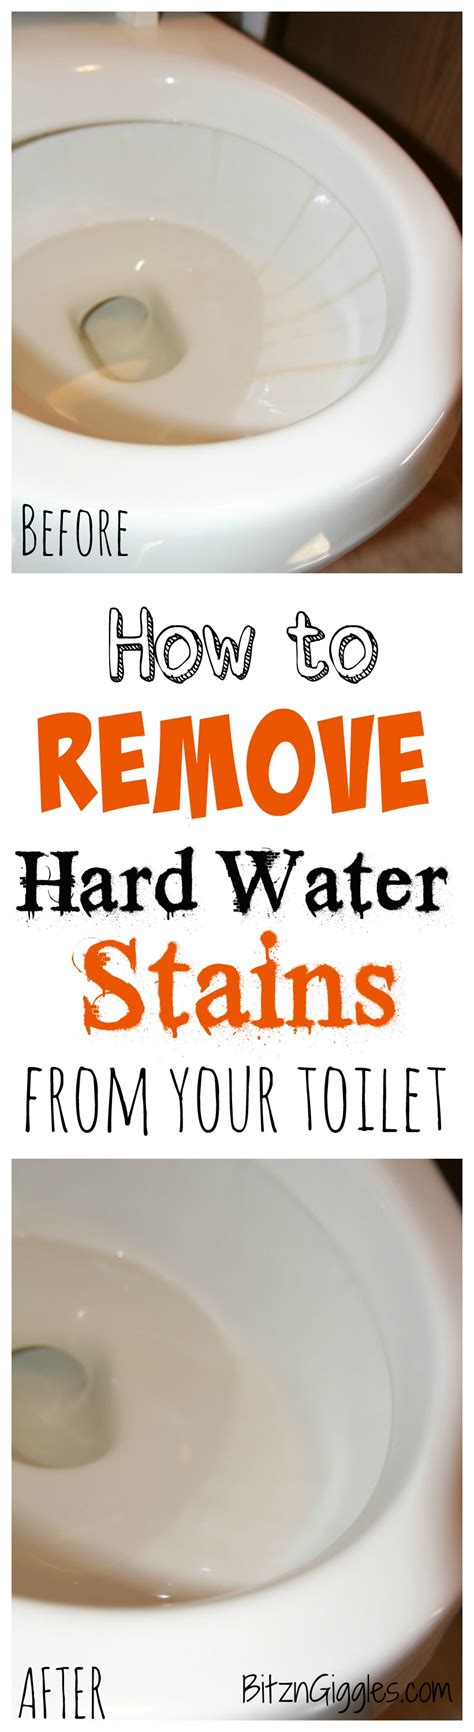 How To Remove Hard Water Stains From Your Toilet